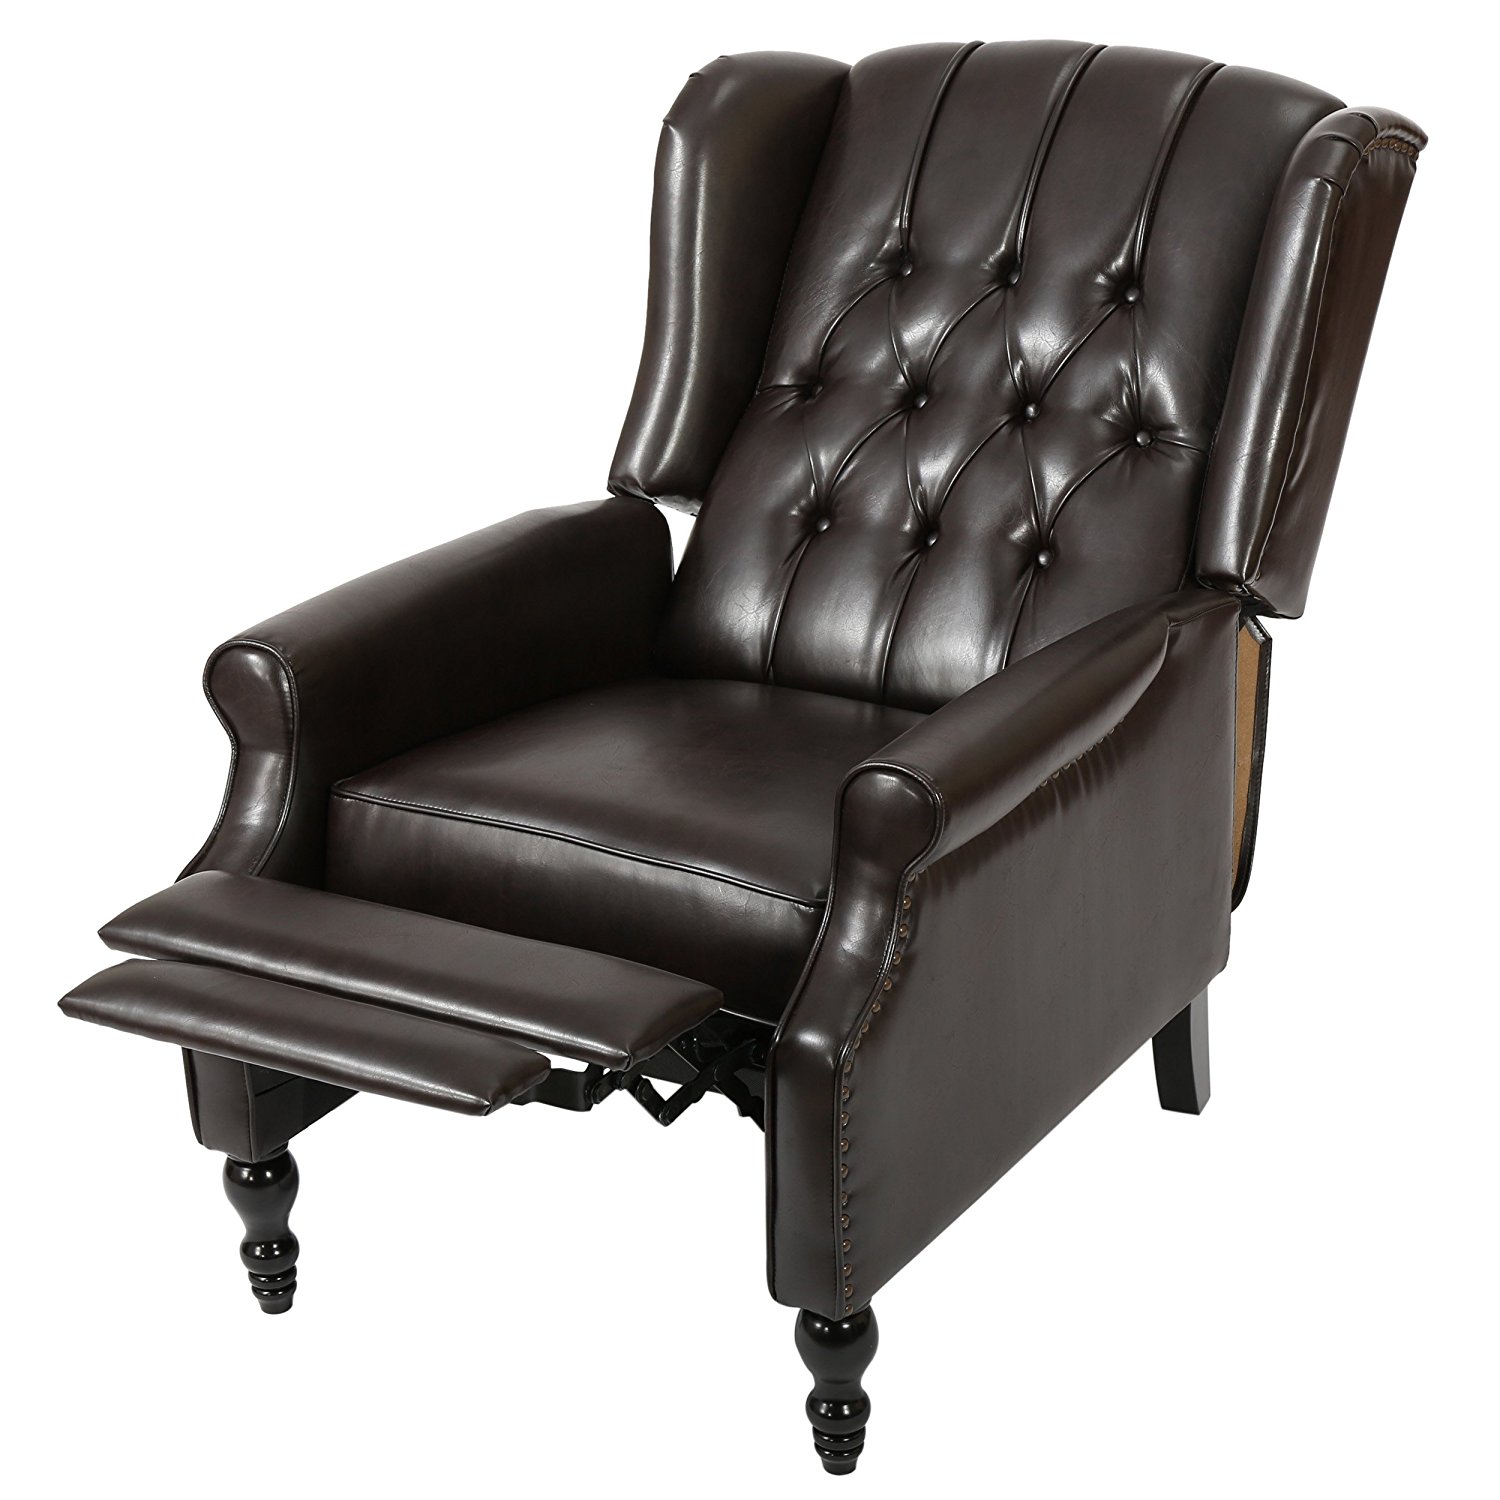 Elizabeth Tufted Brown Bonded Leather Recliner Arm Chair